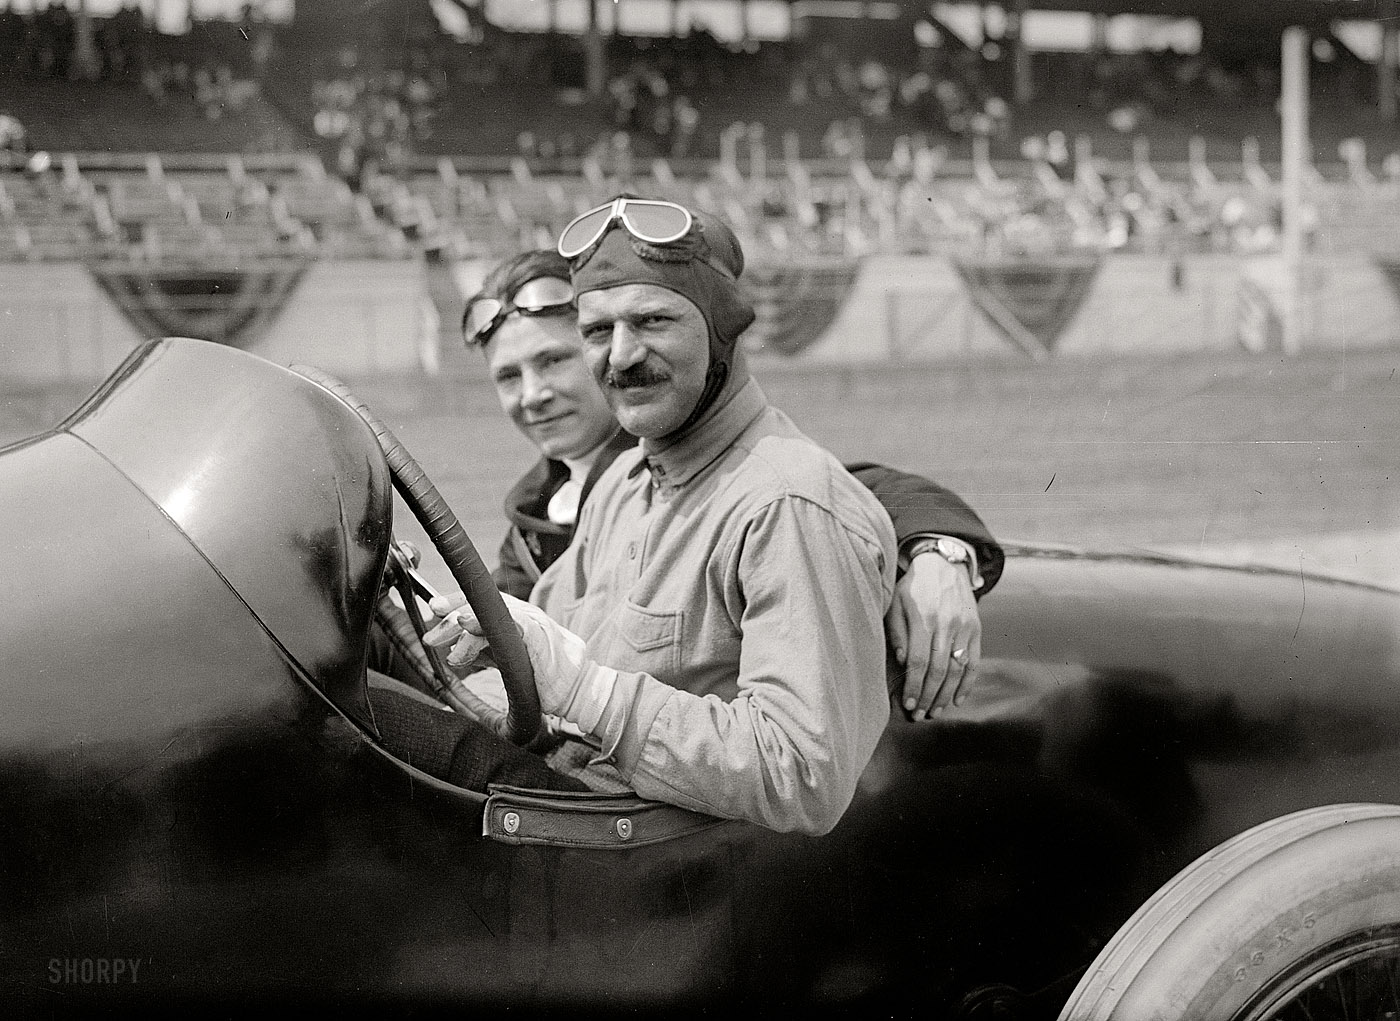 June 1, 1918. French driver Louis Chevrolet and mechanic in their Frontenac at the Sheepshead Bay Speedway in Brooklyn, racing in the Harkness Handicap. 5x7 glass negative, George Grantham Bain Collection. View full size.